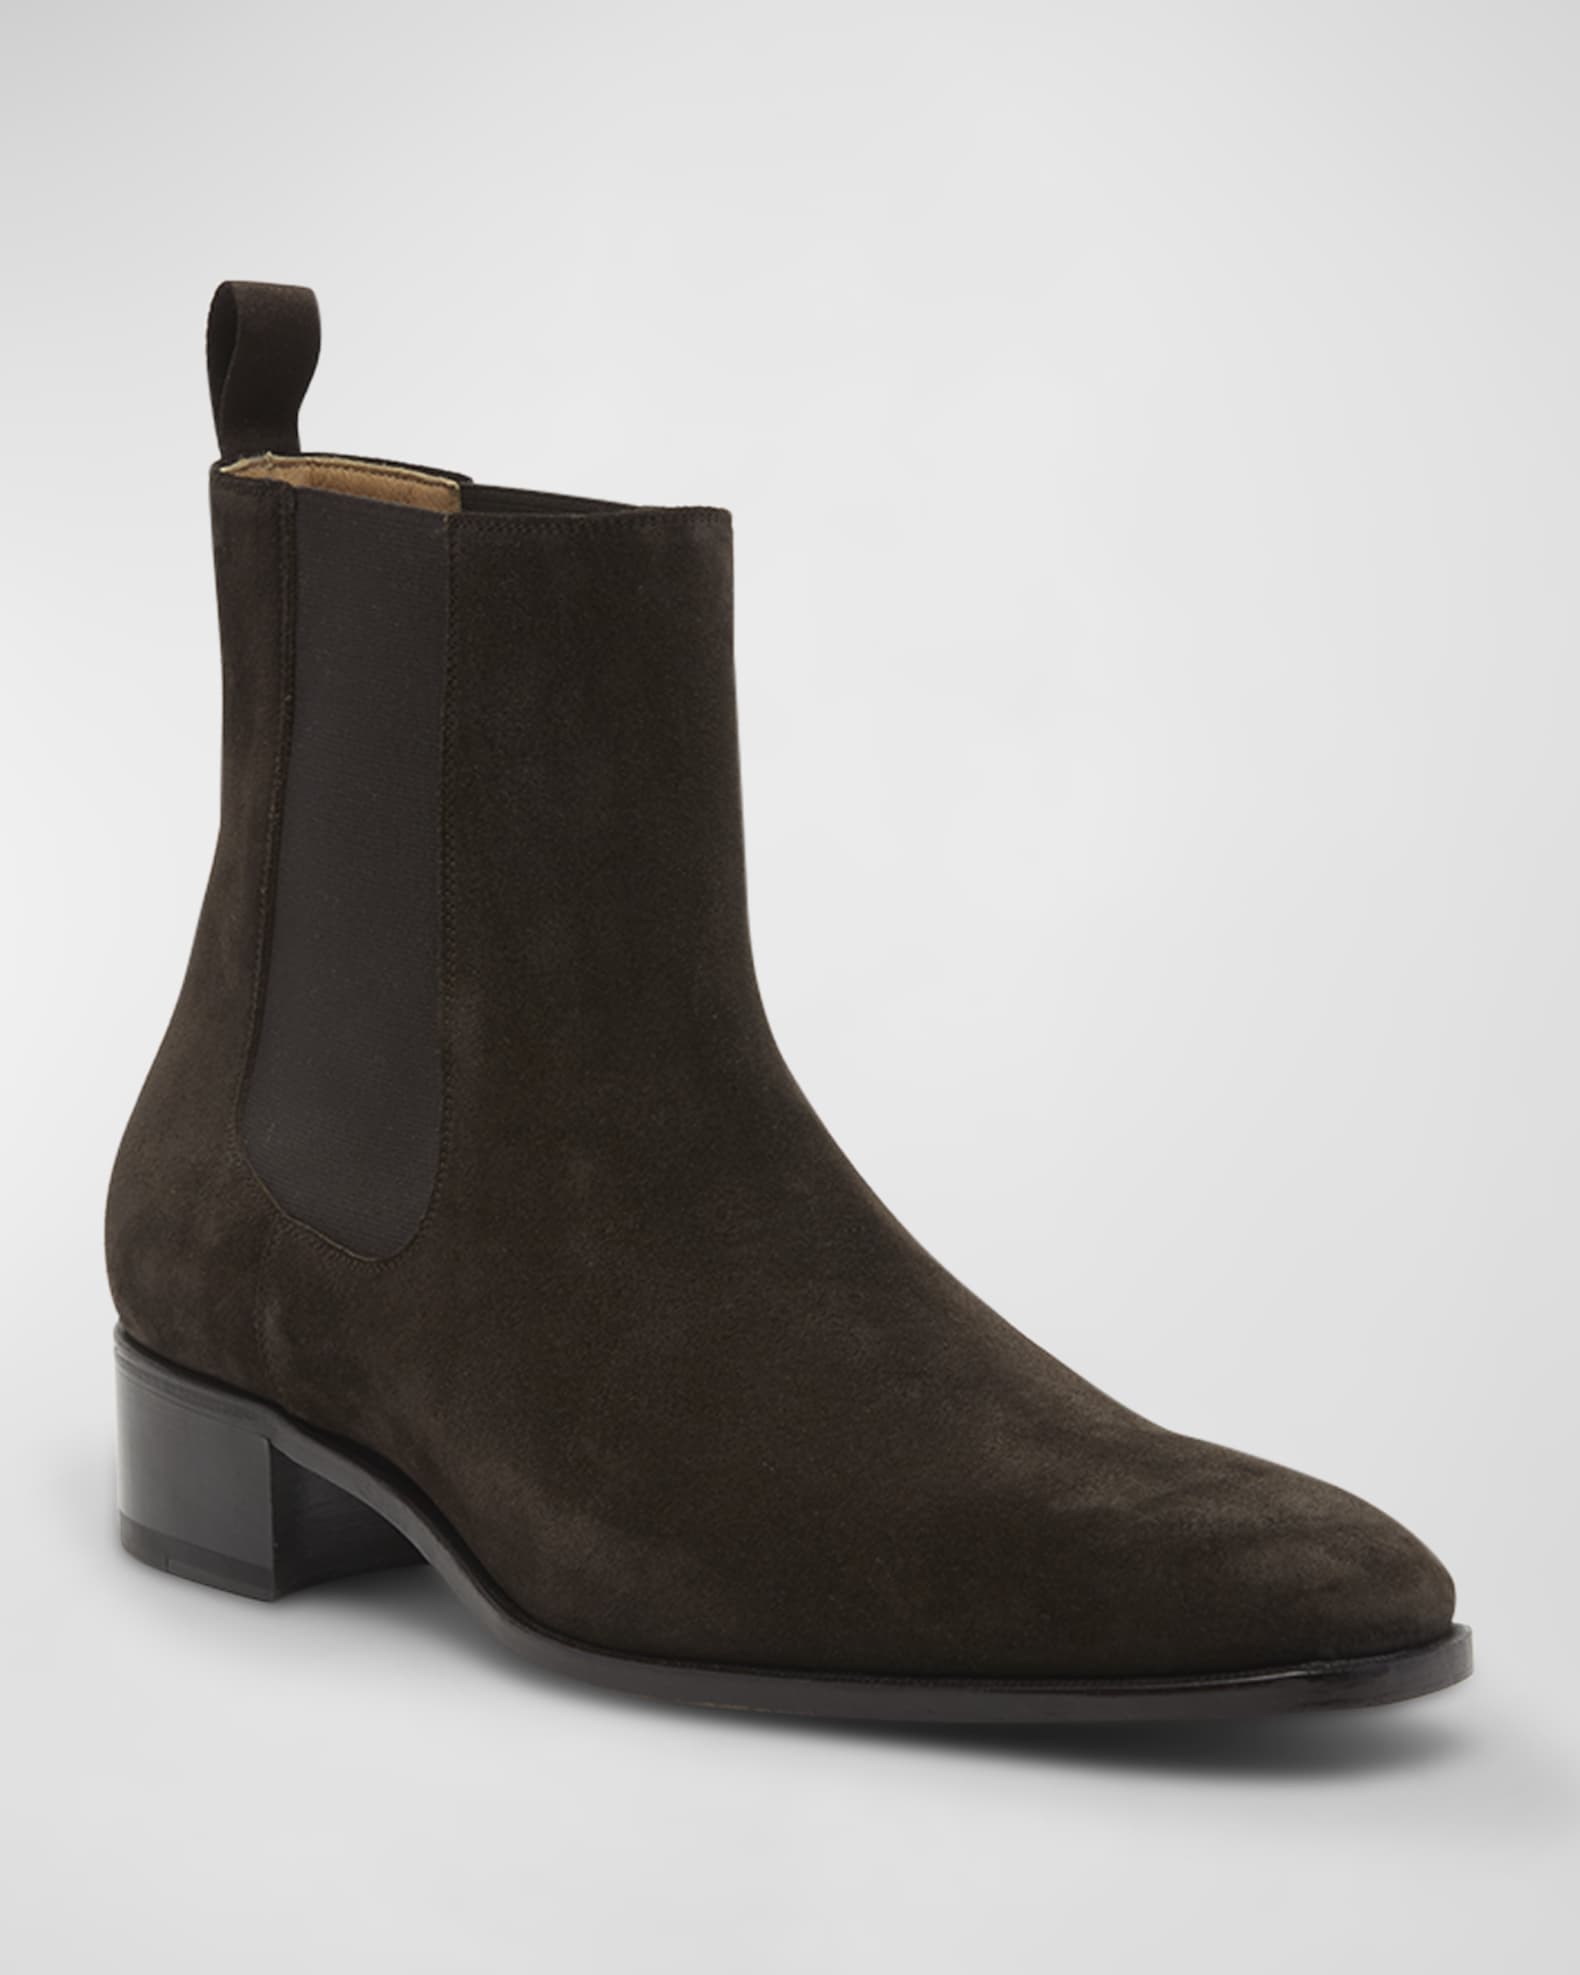 TOM FORD Men's Alec Suede Ankle Chelsea Boots | Neiman Marcus